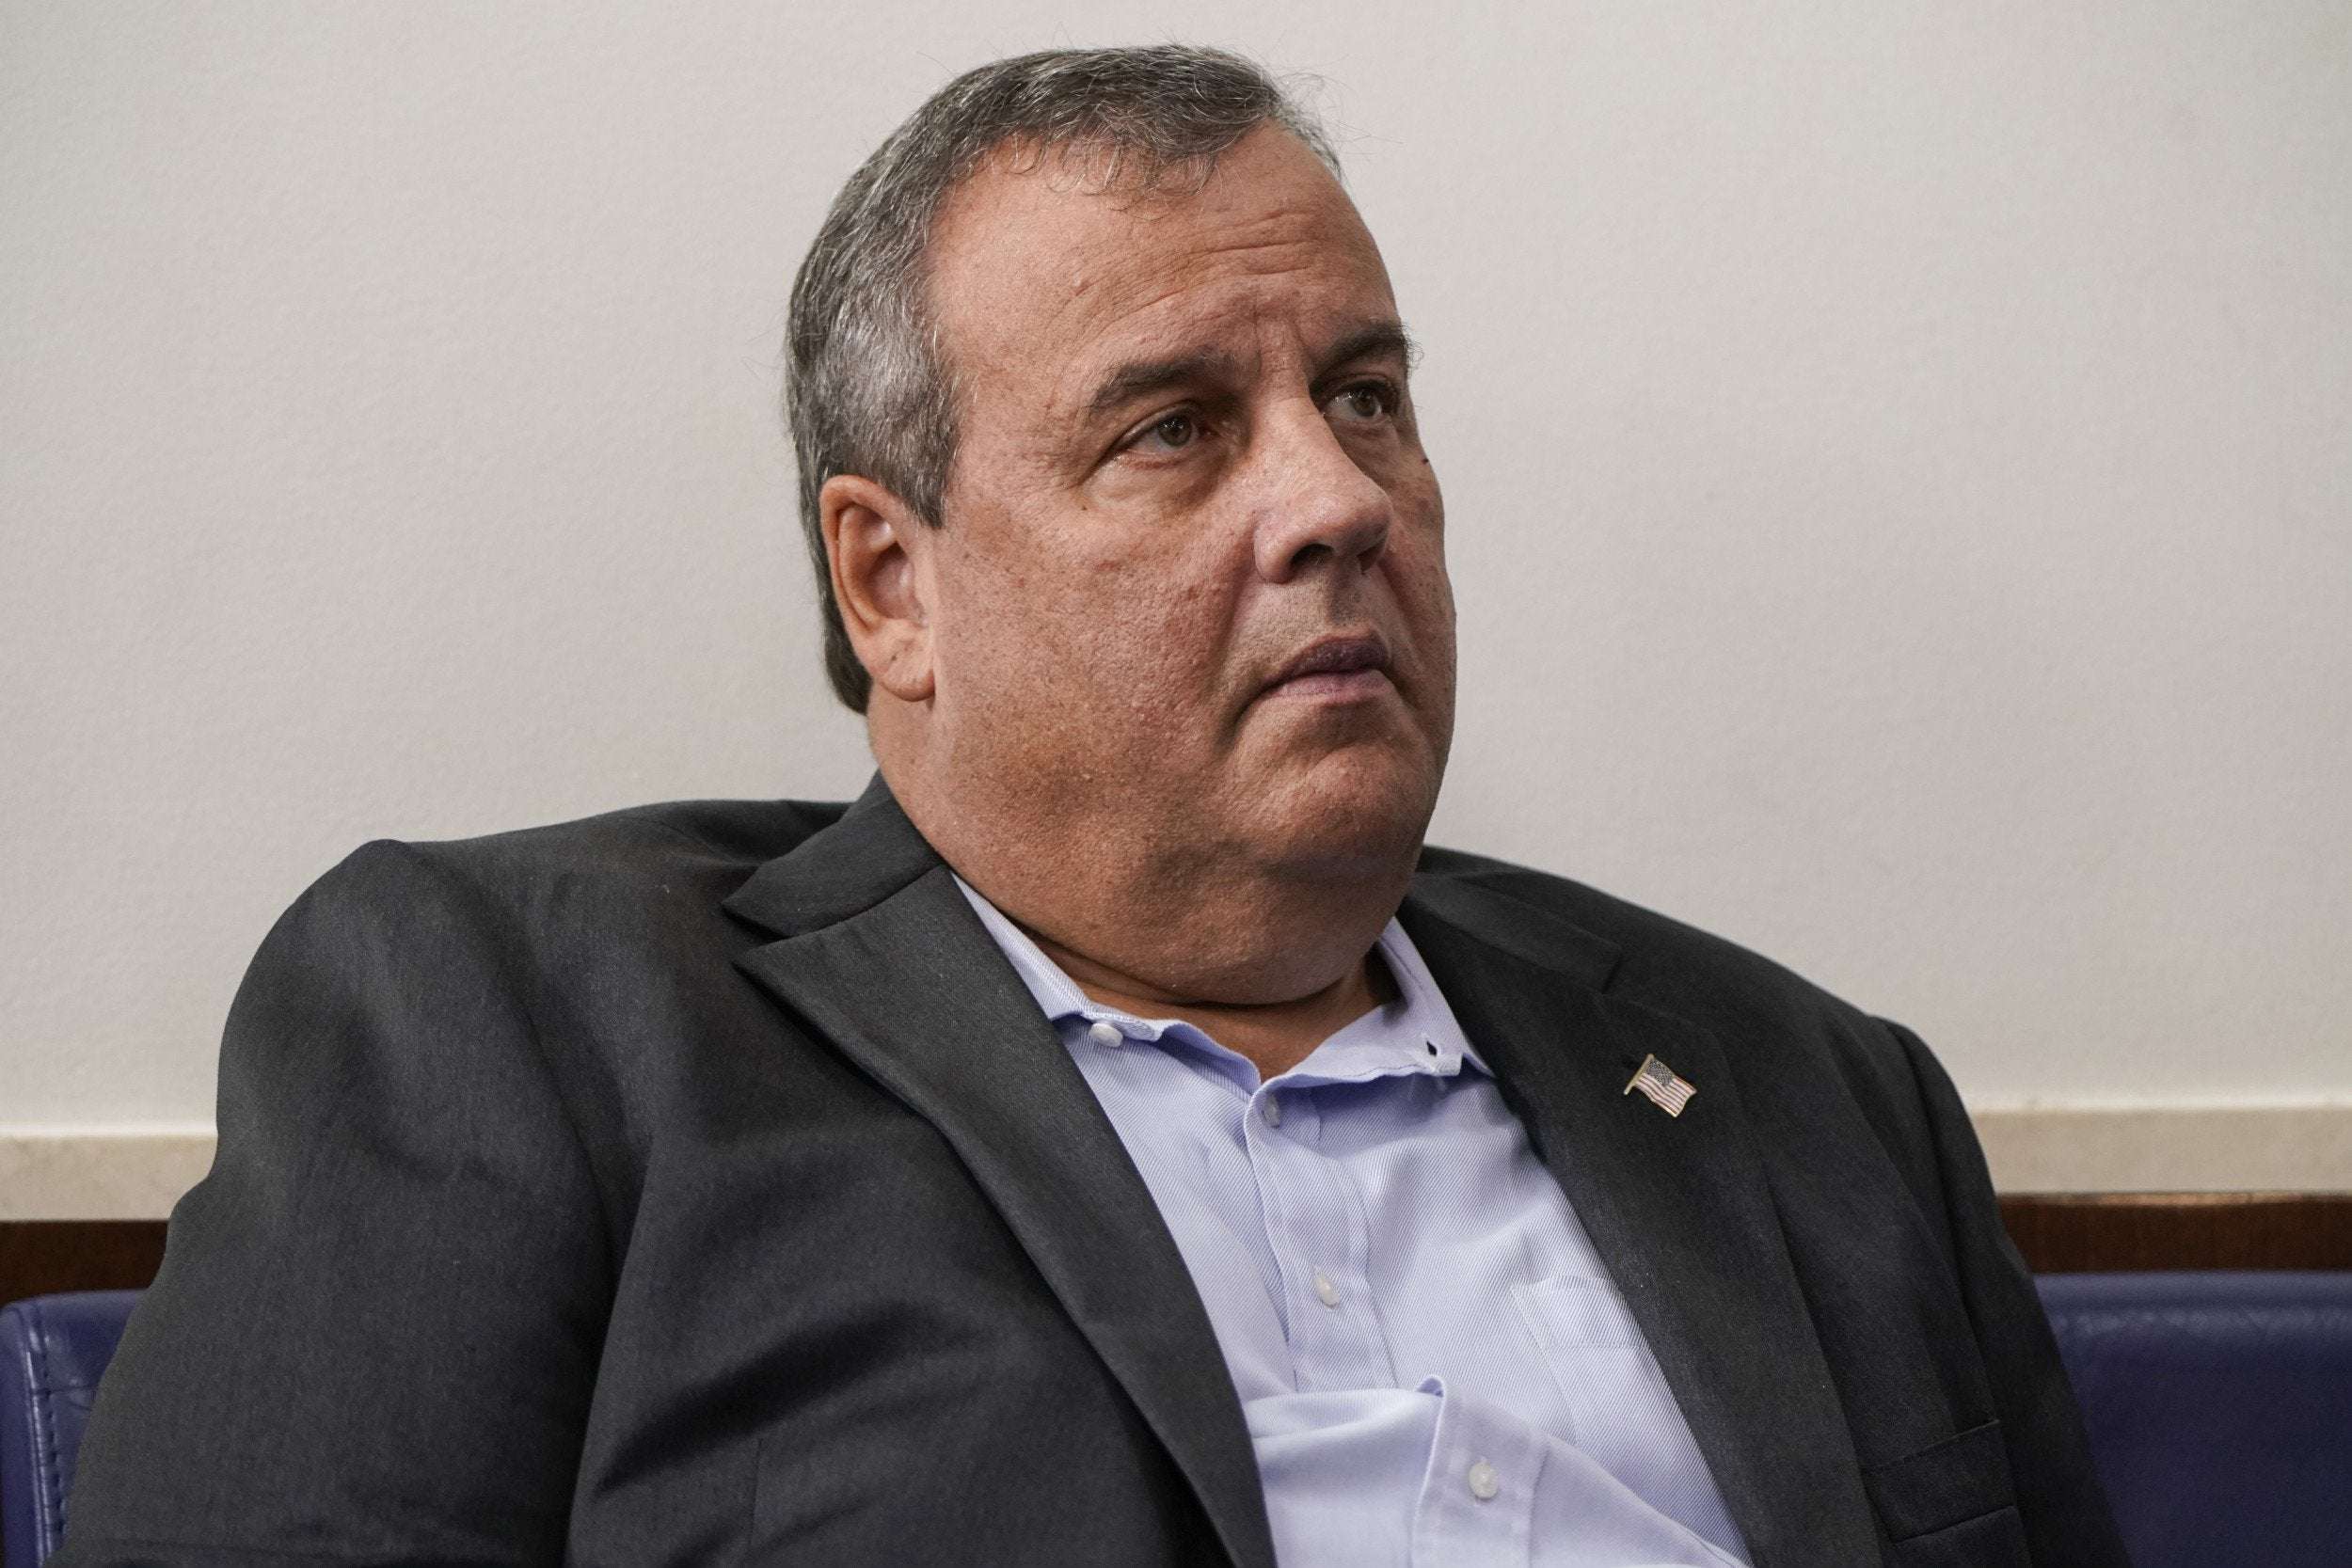 image for Chris Christie Called Out For Seeking COVID Treatment After Cavalier Remarks, Behavior